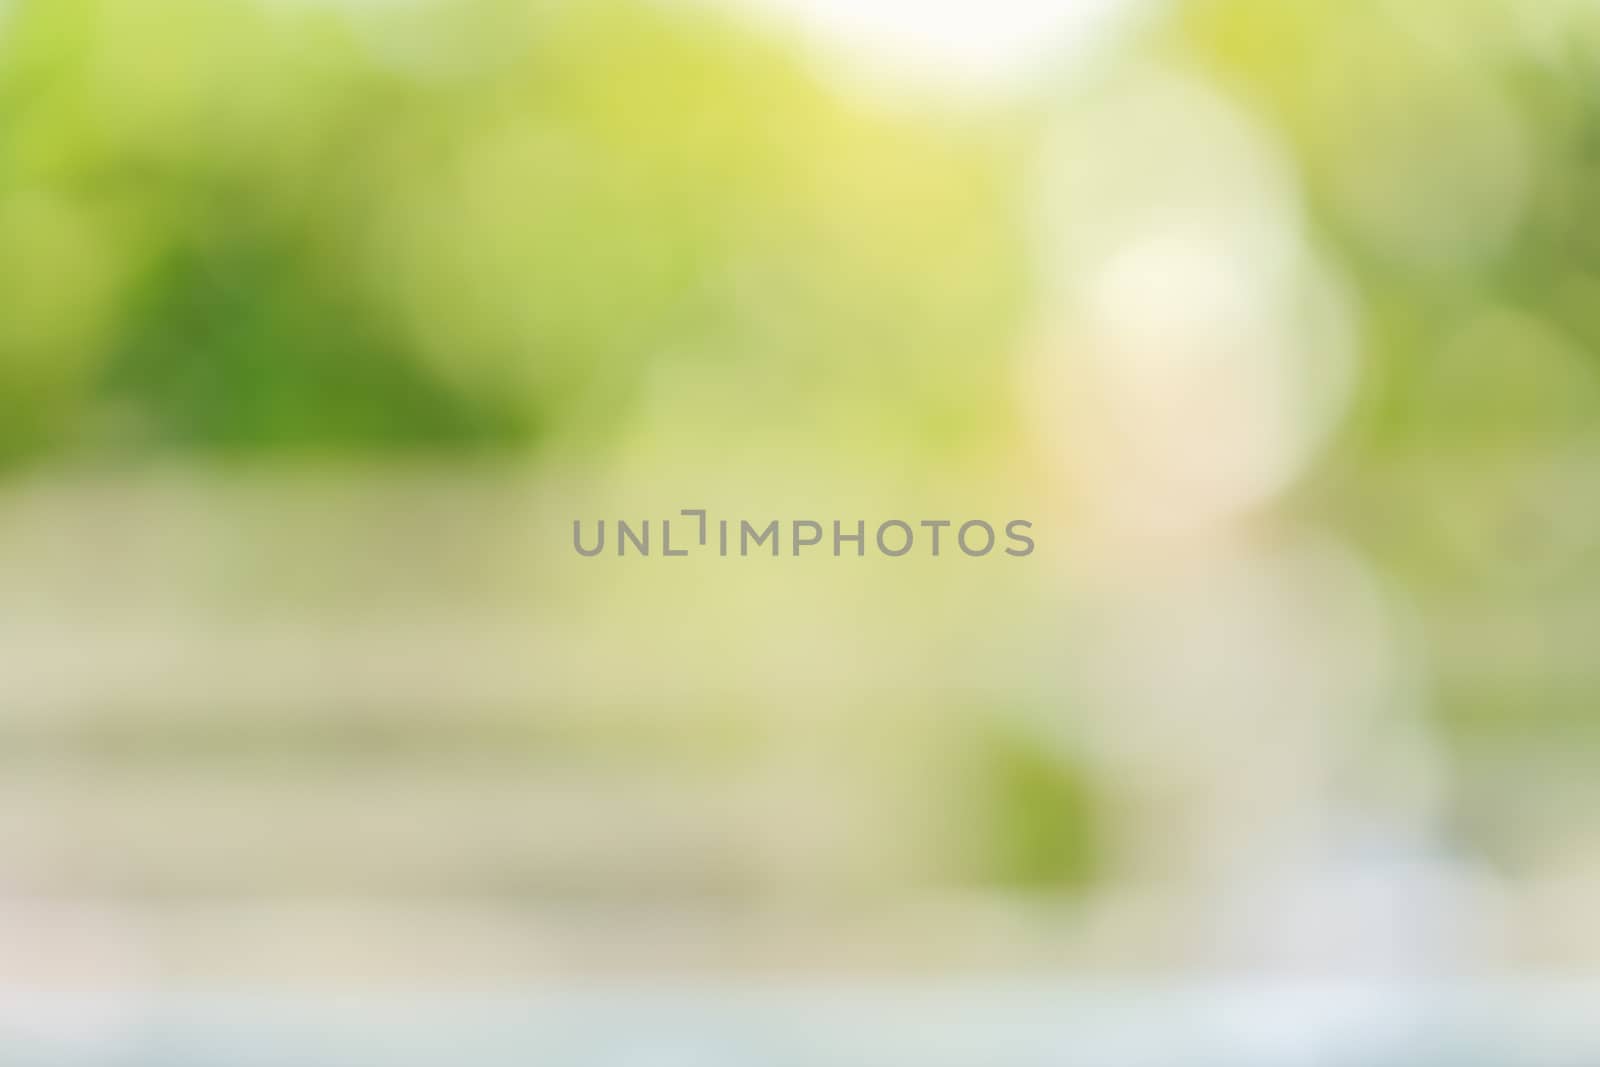 Abstract blurred out of focus and blurred green leaf background  by mthipsorn